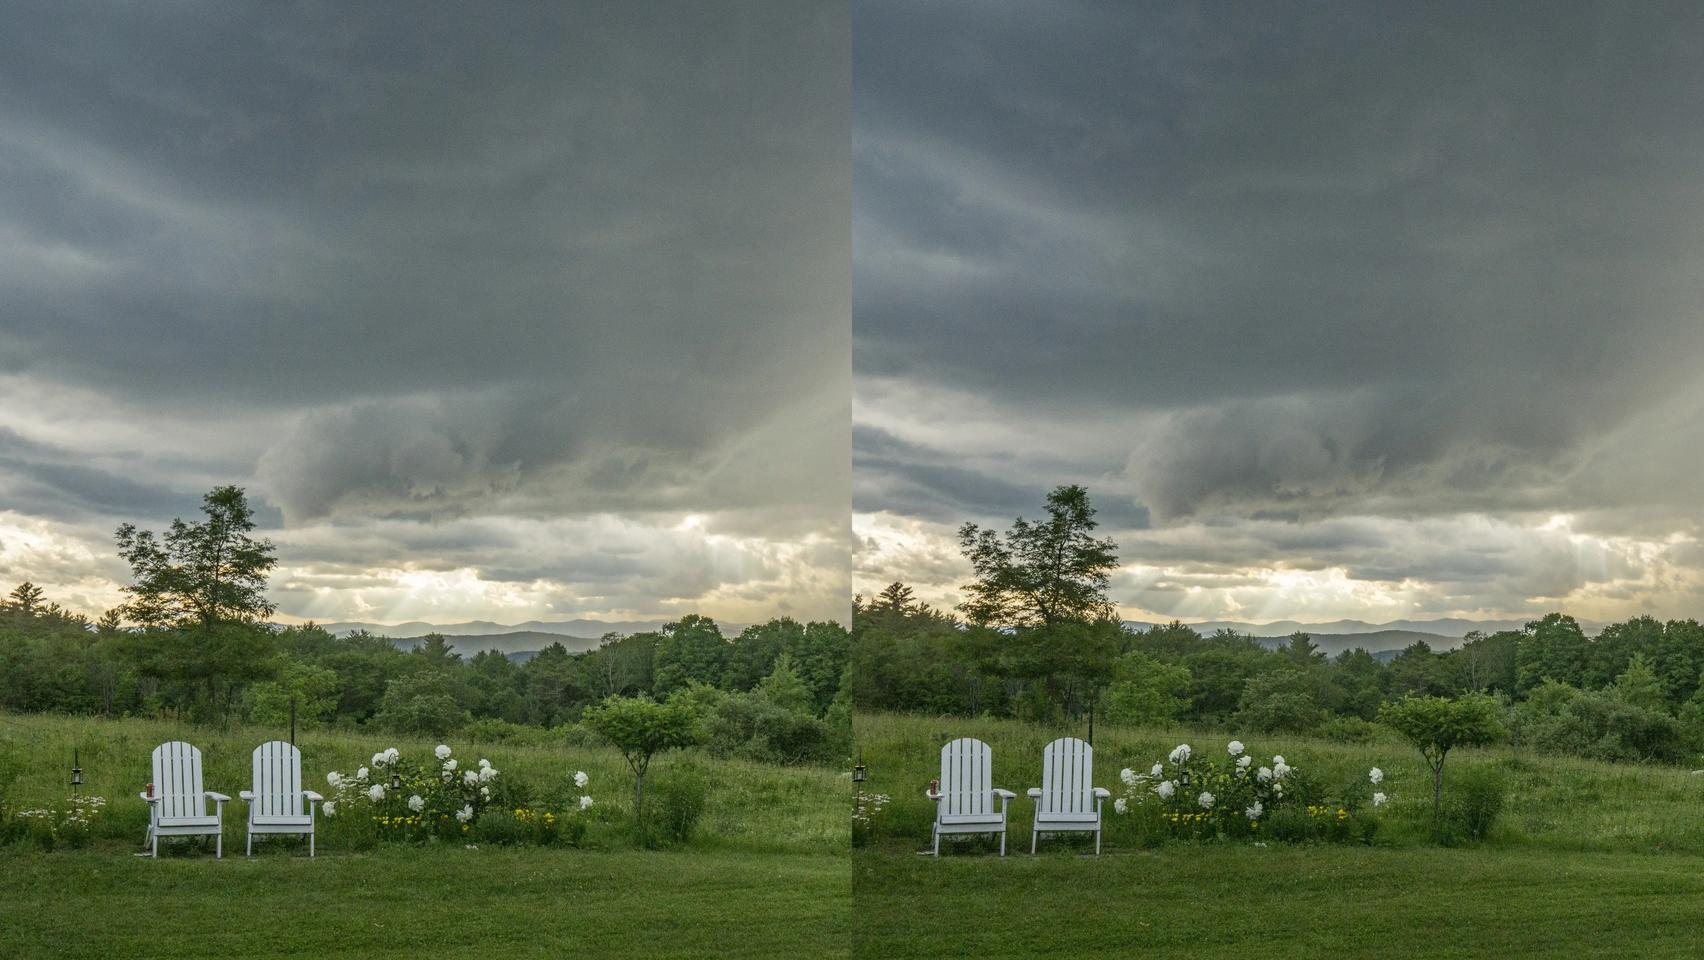 Approaching storm, Vershire Vermont, 2019